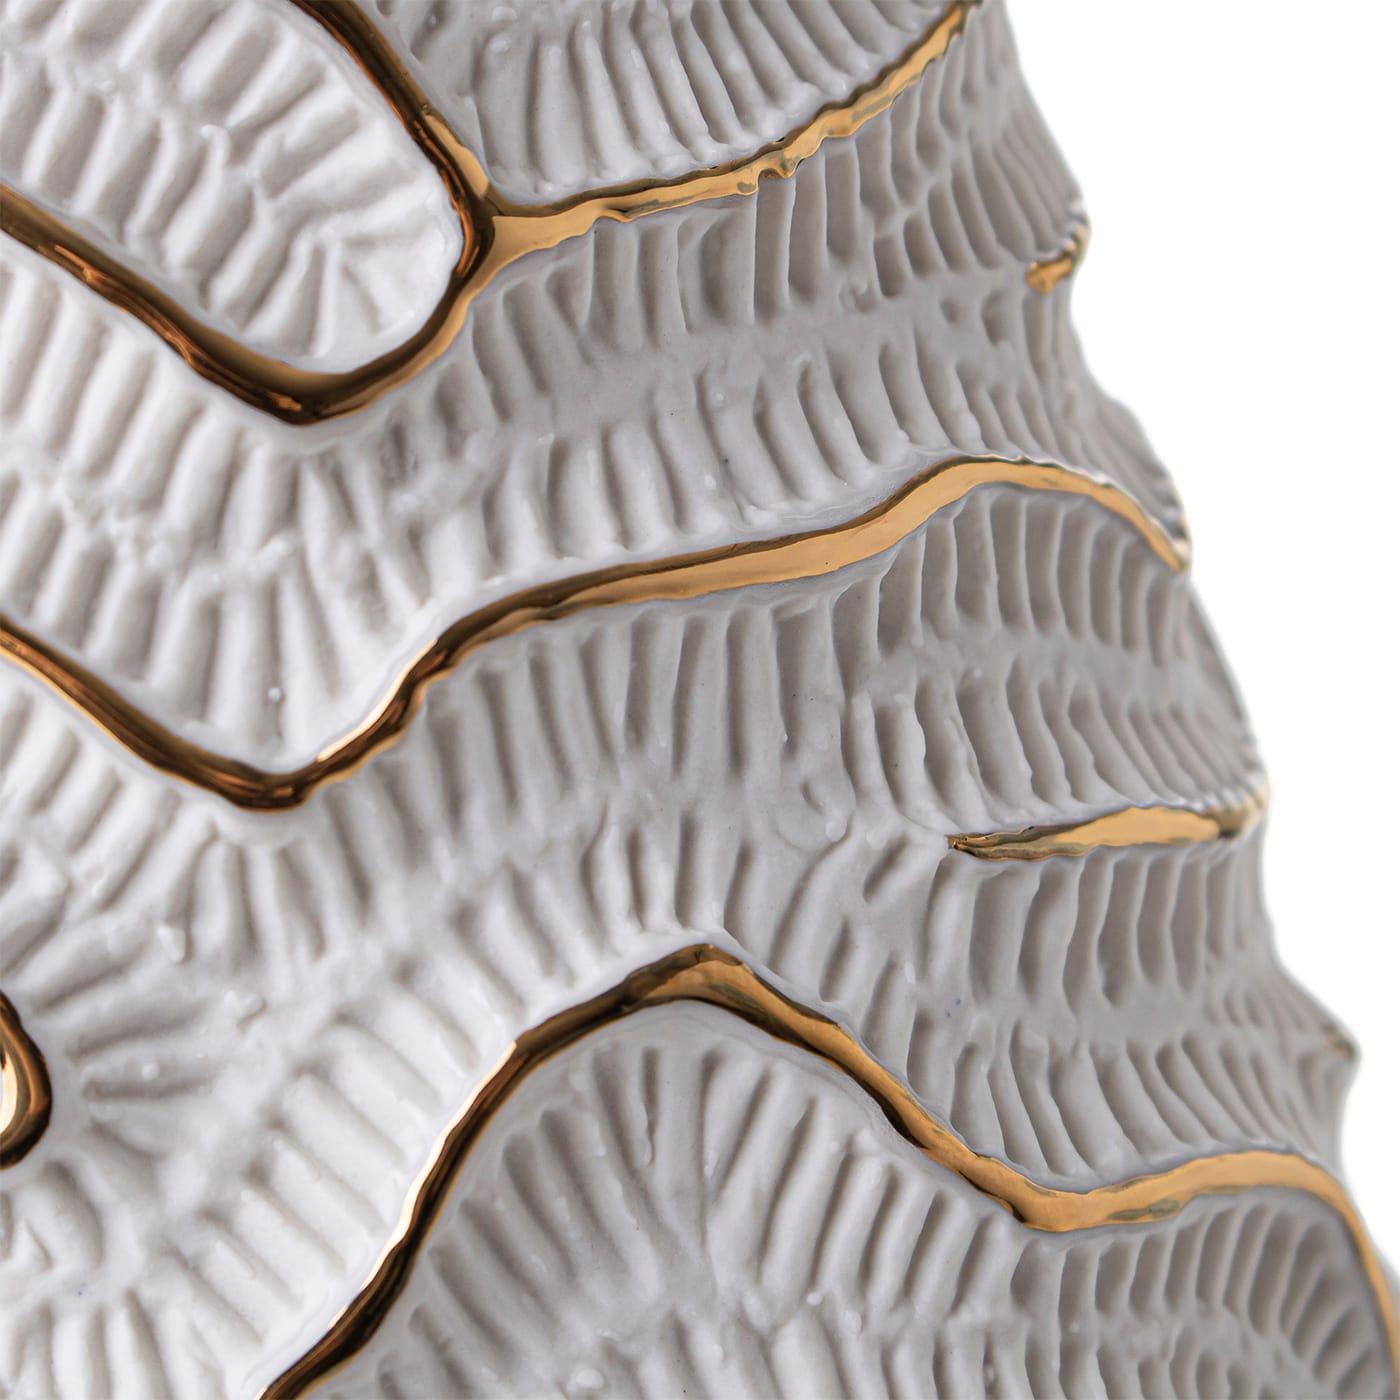 A mesmerizing texture, recalling fossils of madrepores, acts as a skeleton for this elegant vase of Fossilia collection. The original shape and the accuracy in the details of the unglazed porcelain make this piece an exquisite artwork. The vase is